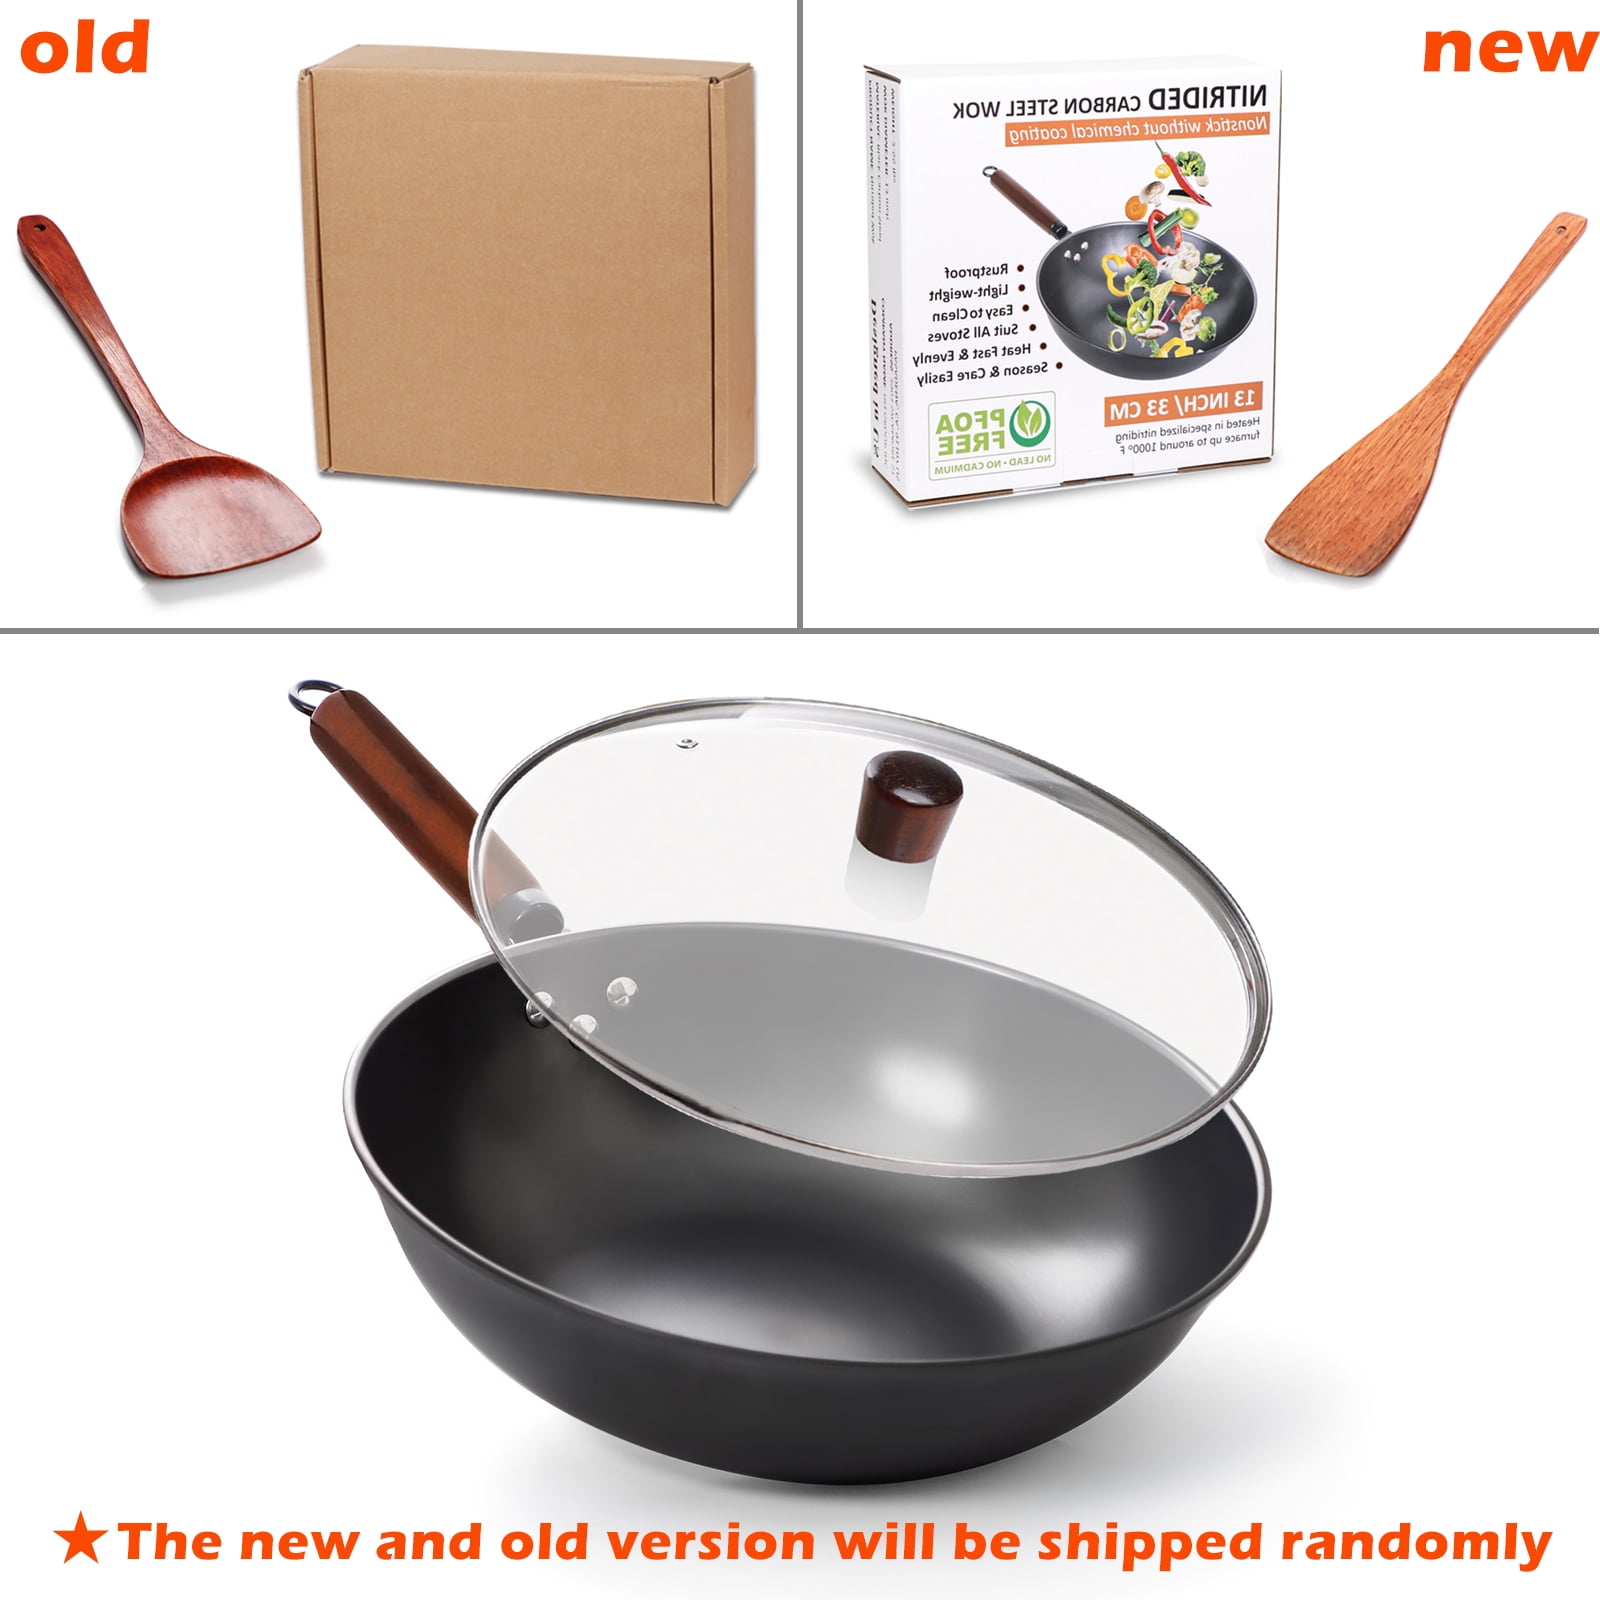 Carbon Steel Frying Wok Pan with Lid and Wooden Spatula, Clatine